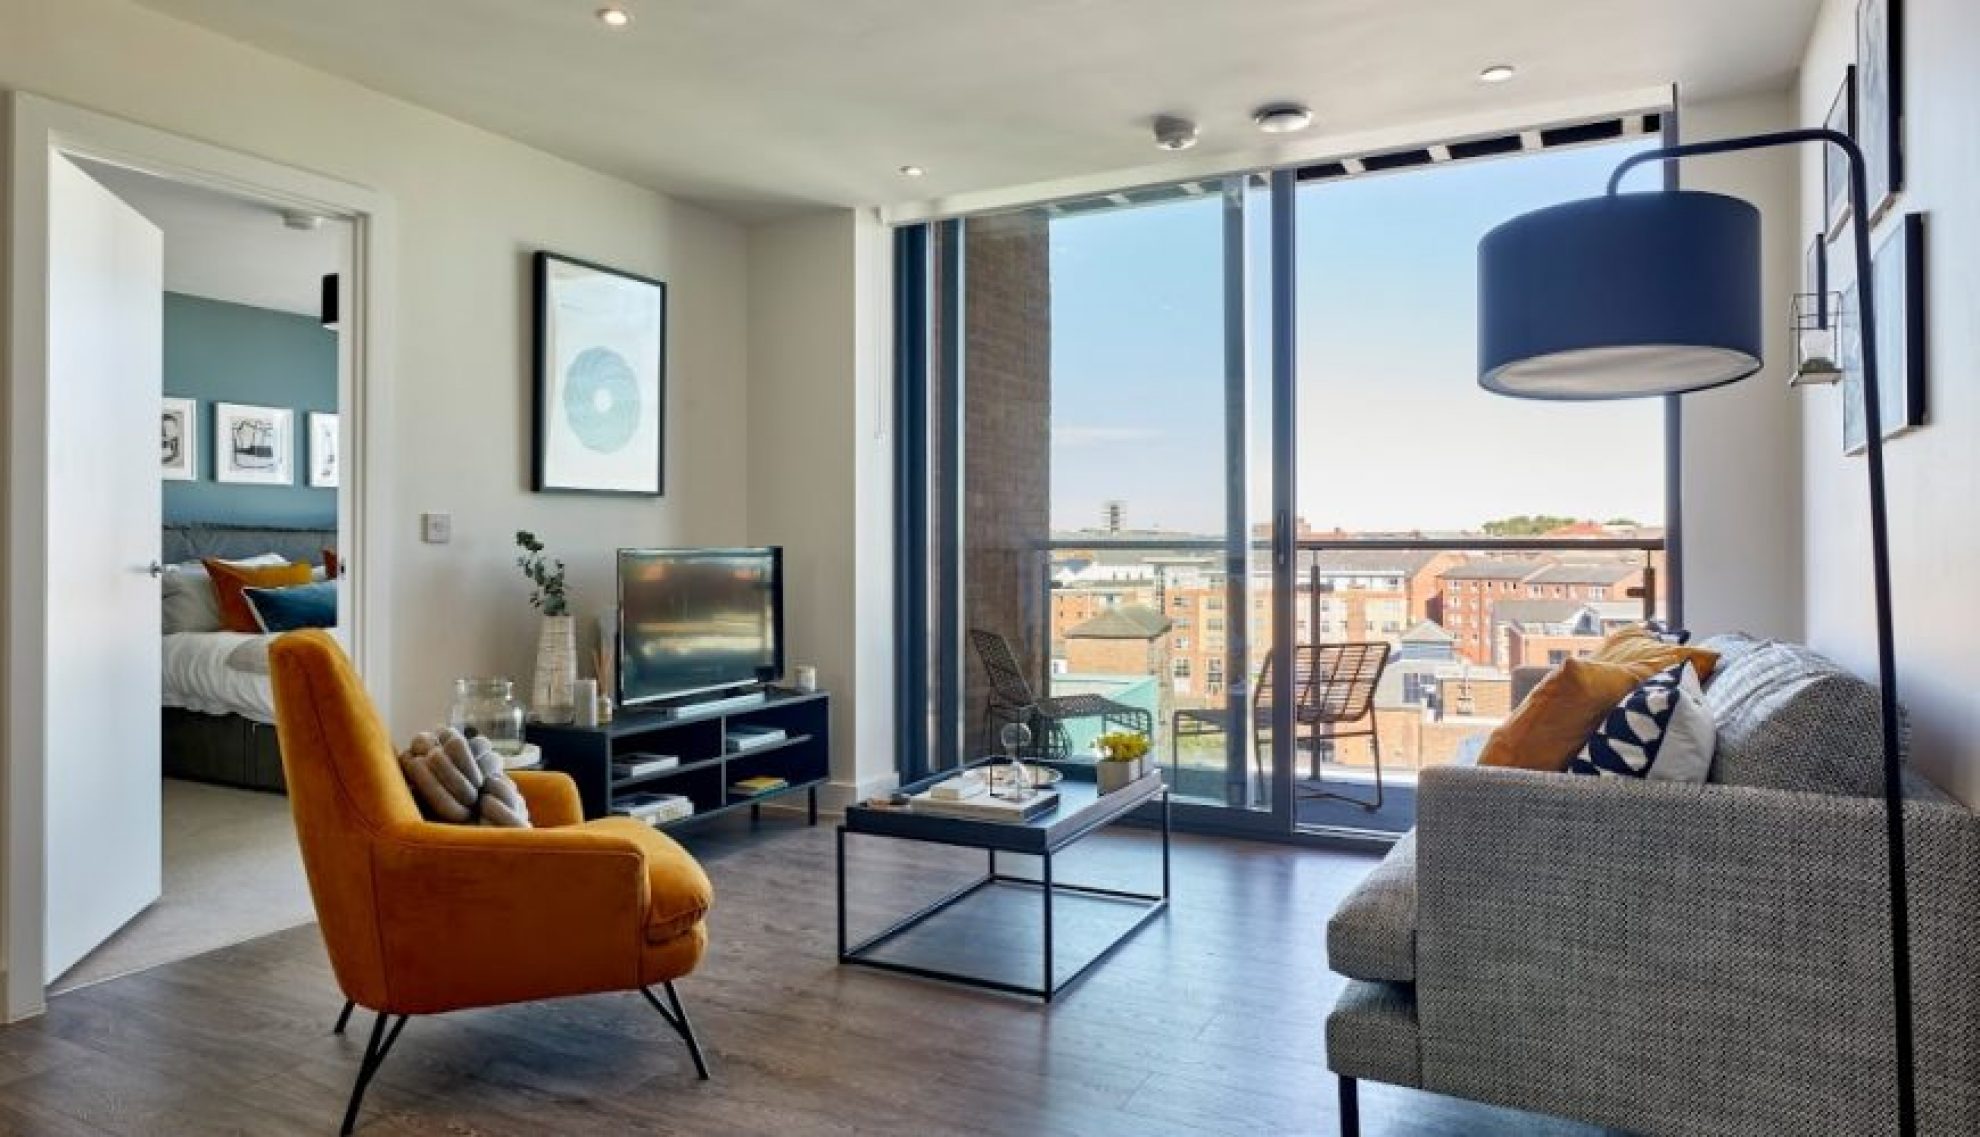 A room in the The Whitmore Collection – and of the highest-rated new homes developments in the West Midlands